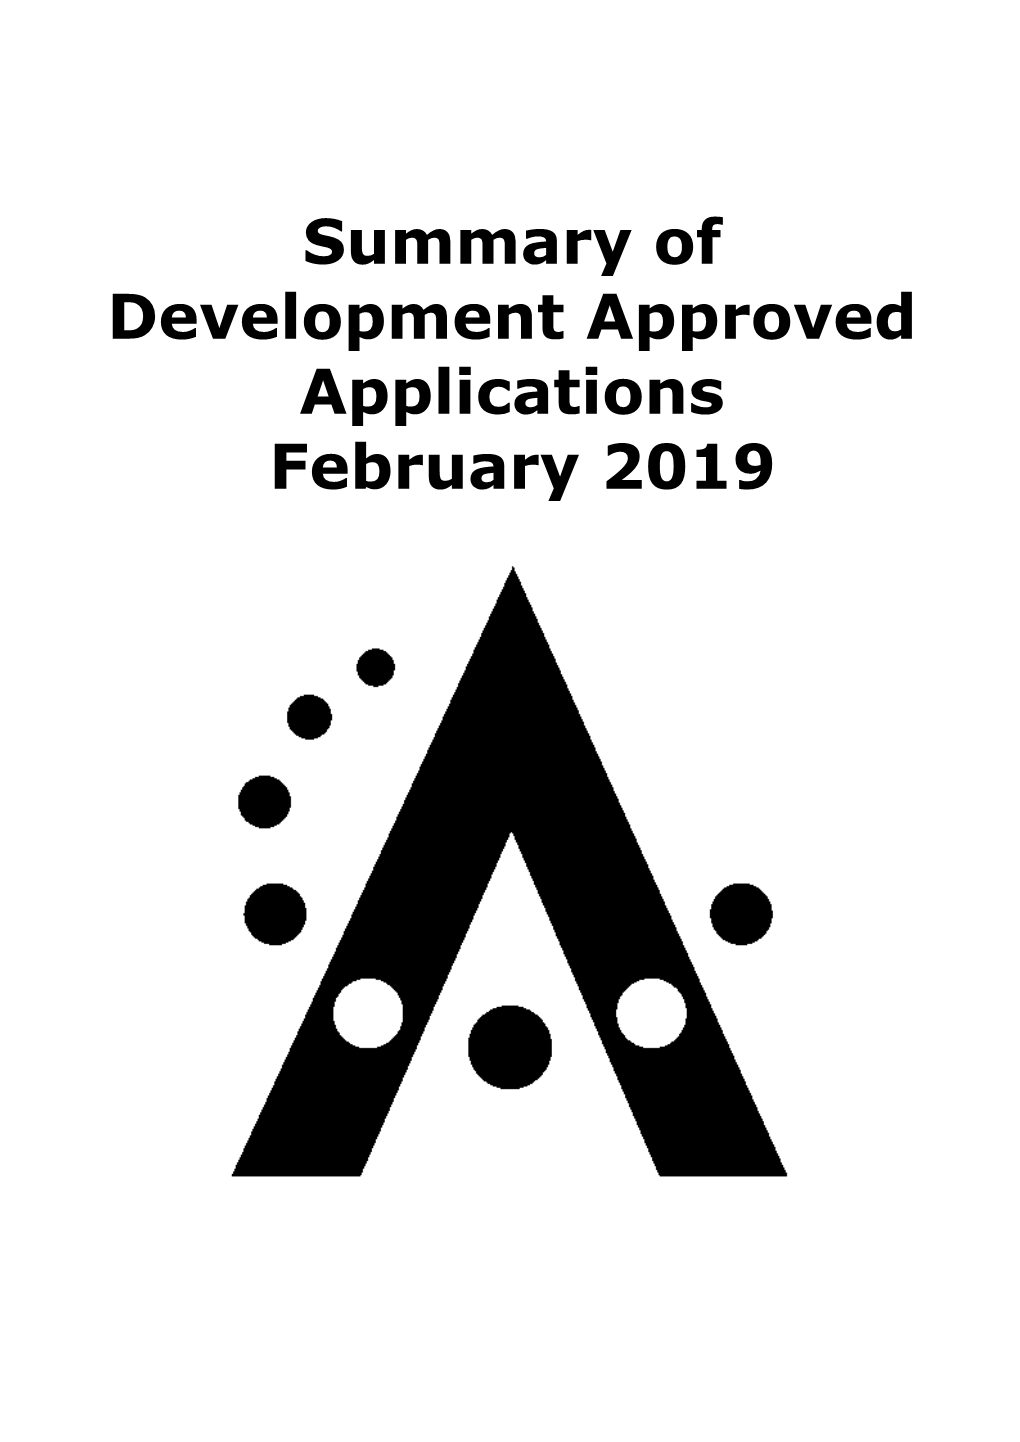 Summary of Development Approved Applications February 2019 Summary of Development Approved Applications February 2019